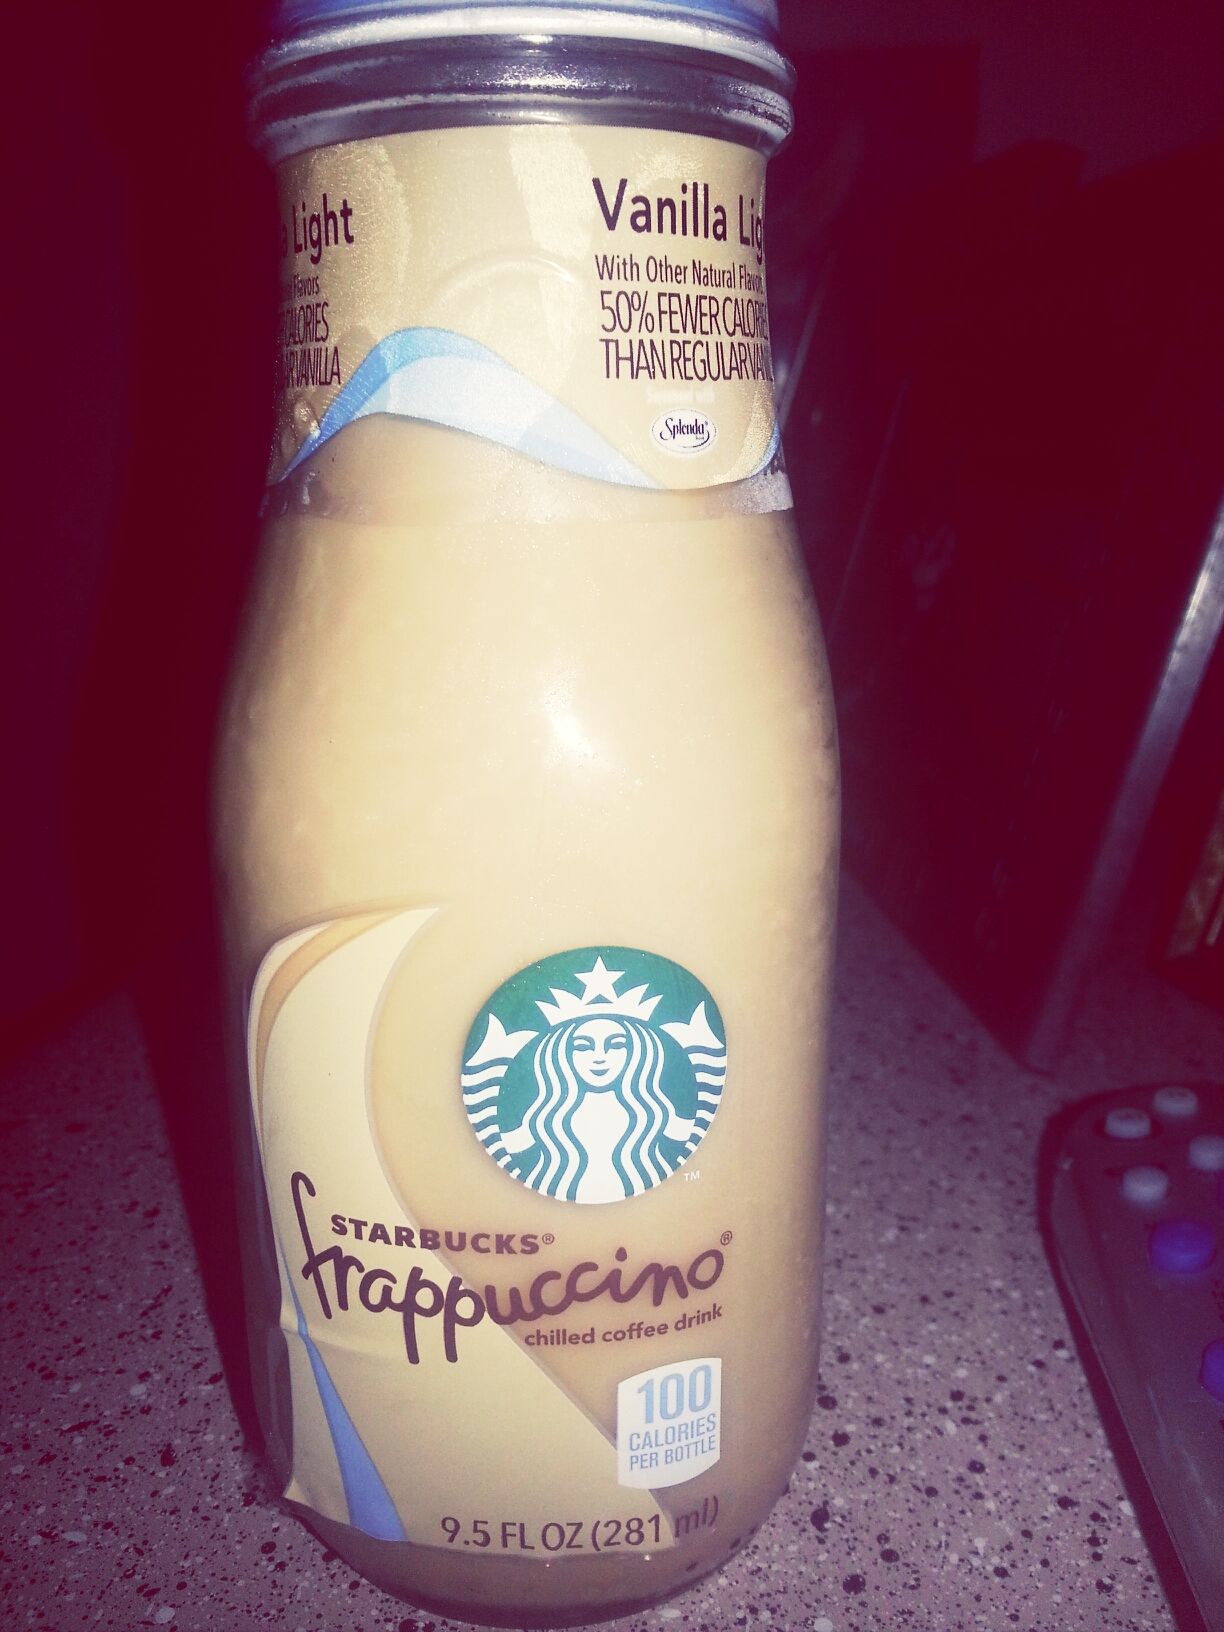 Delicious way to start my morning♥